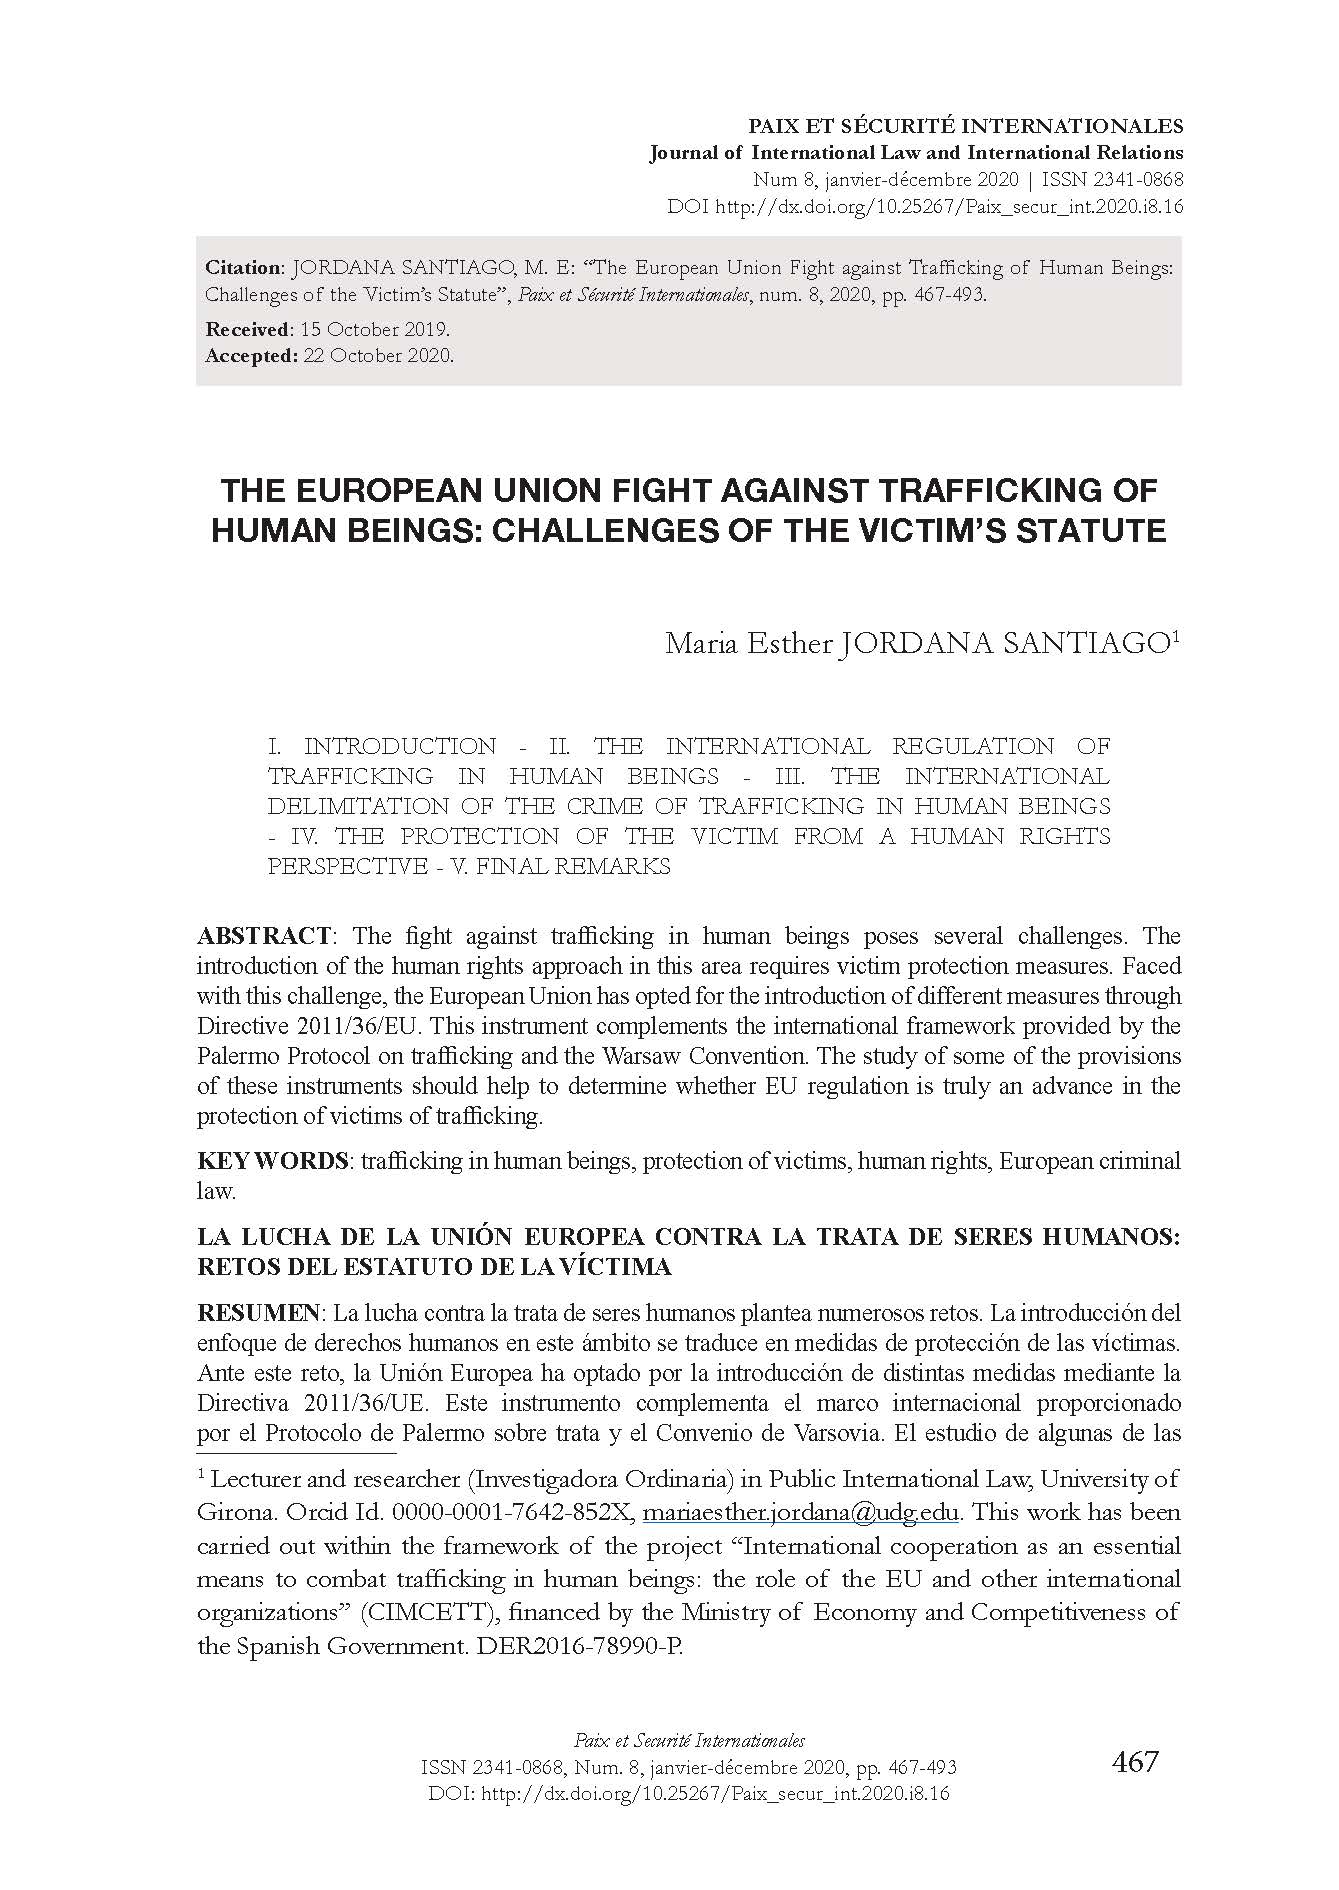 The European Union Fight against Trafficking of Human Beings: Challenges of the Victim’s Statute